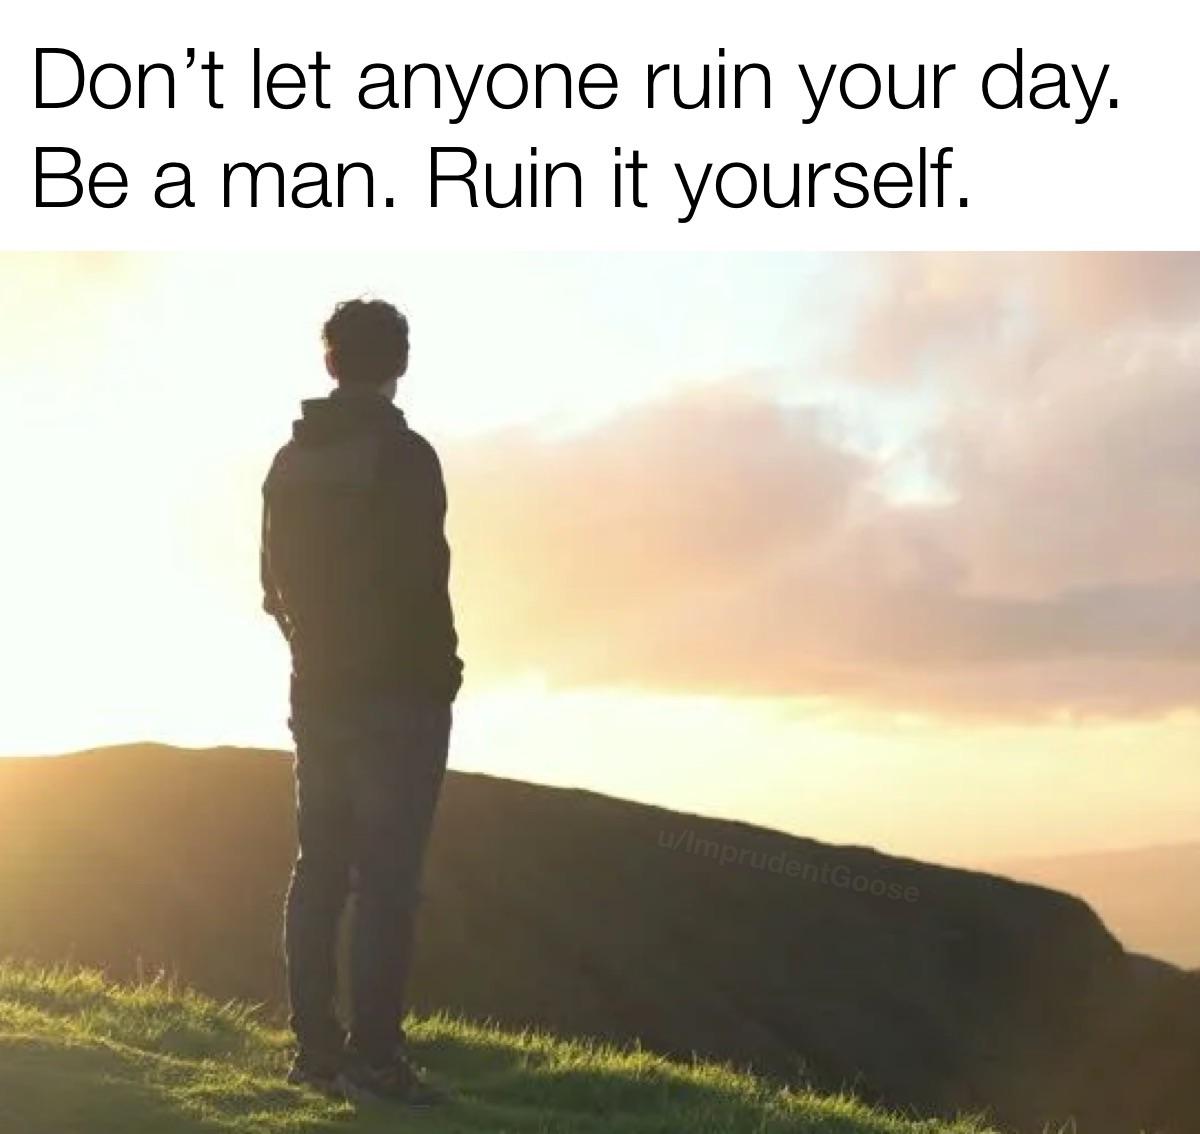 sky - Don't let anyone ruin your day. Be a man. Ruin it yourself. uimprudentGoose